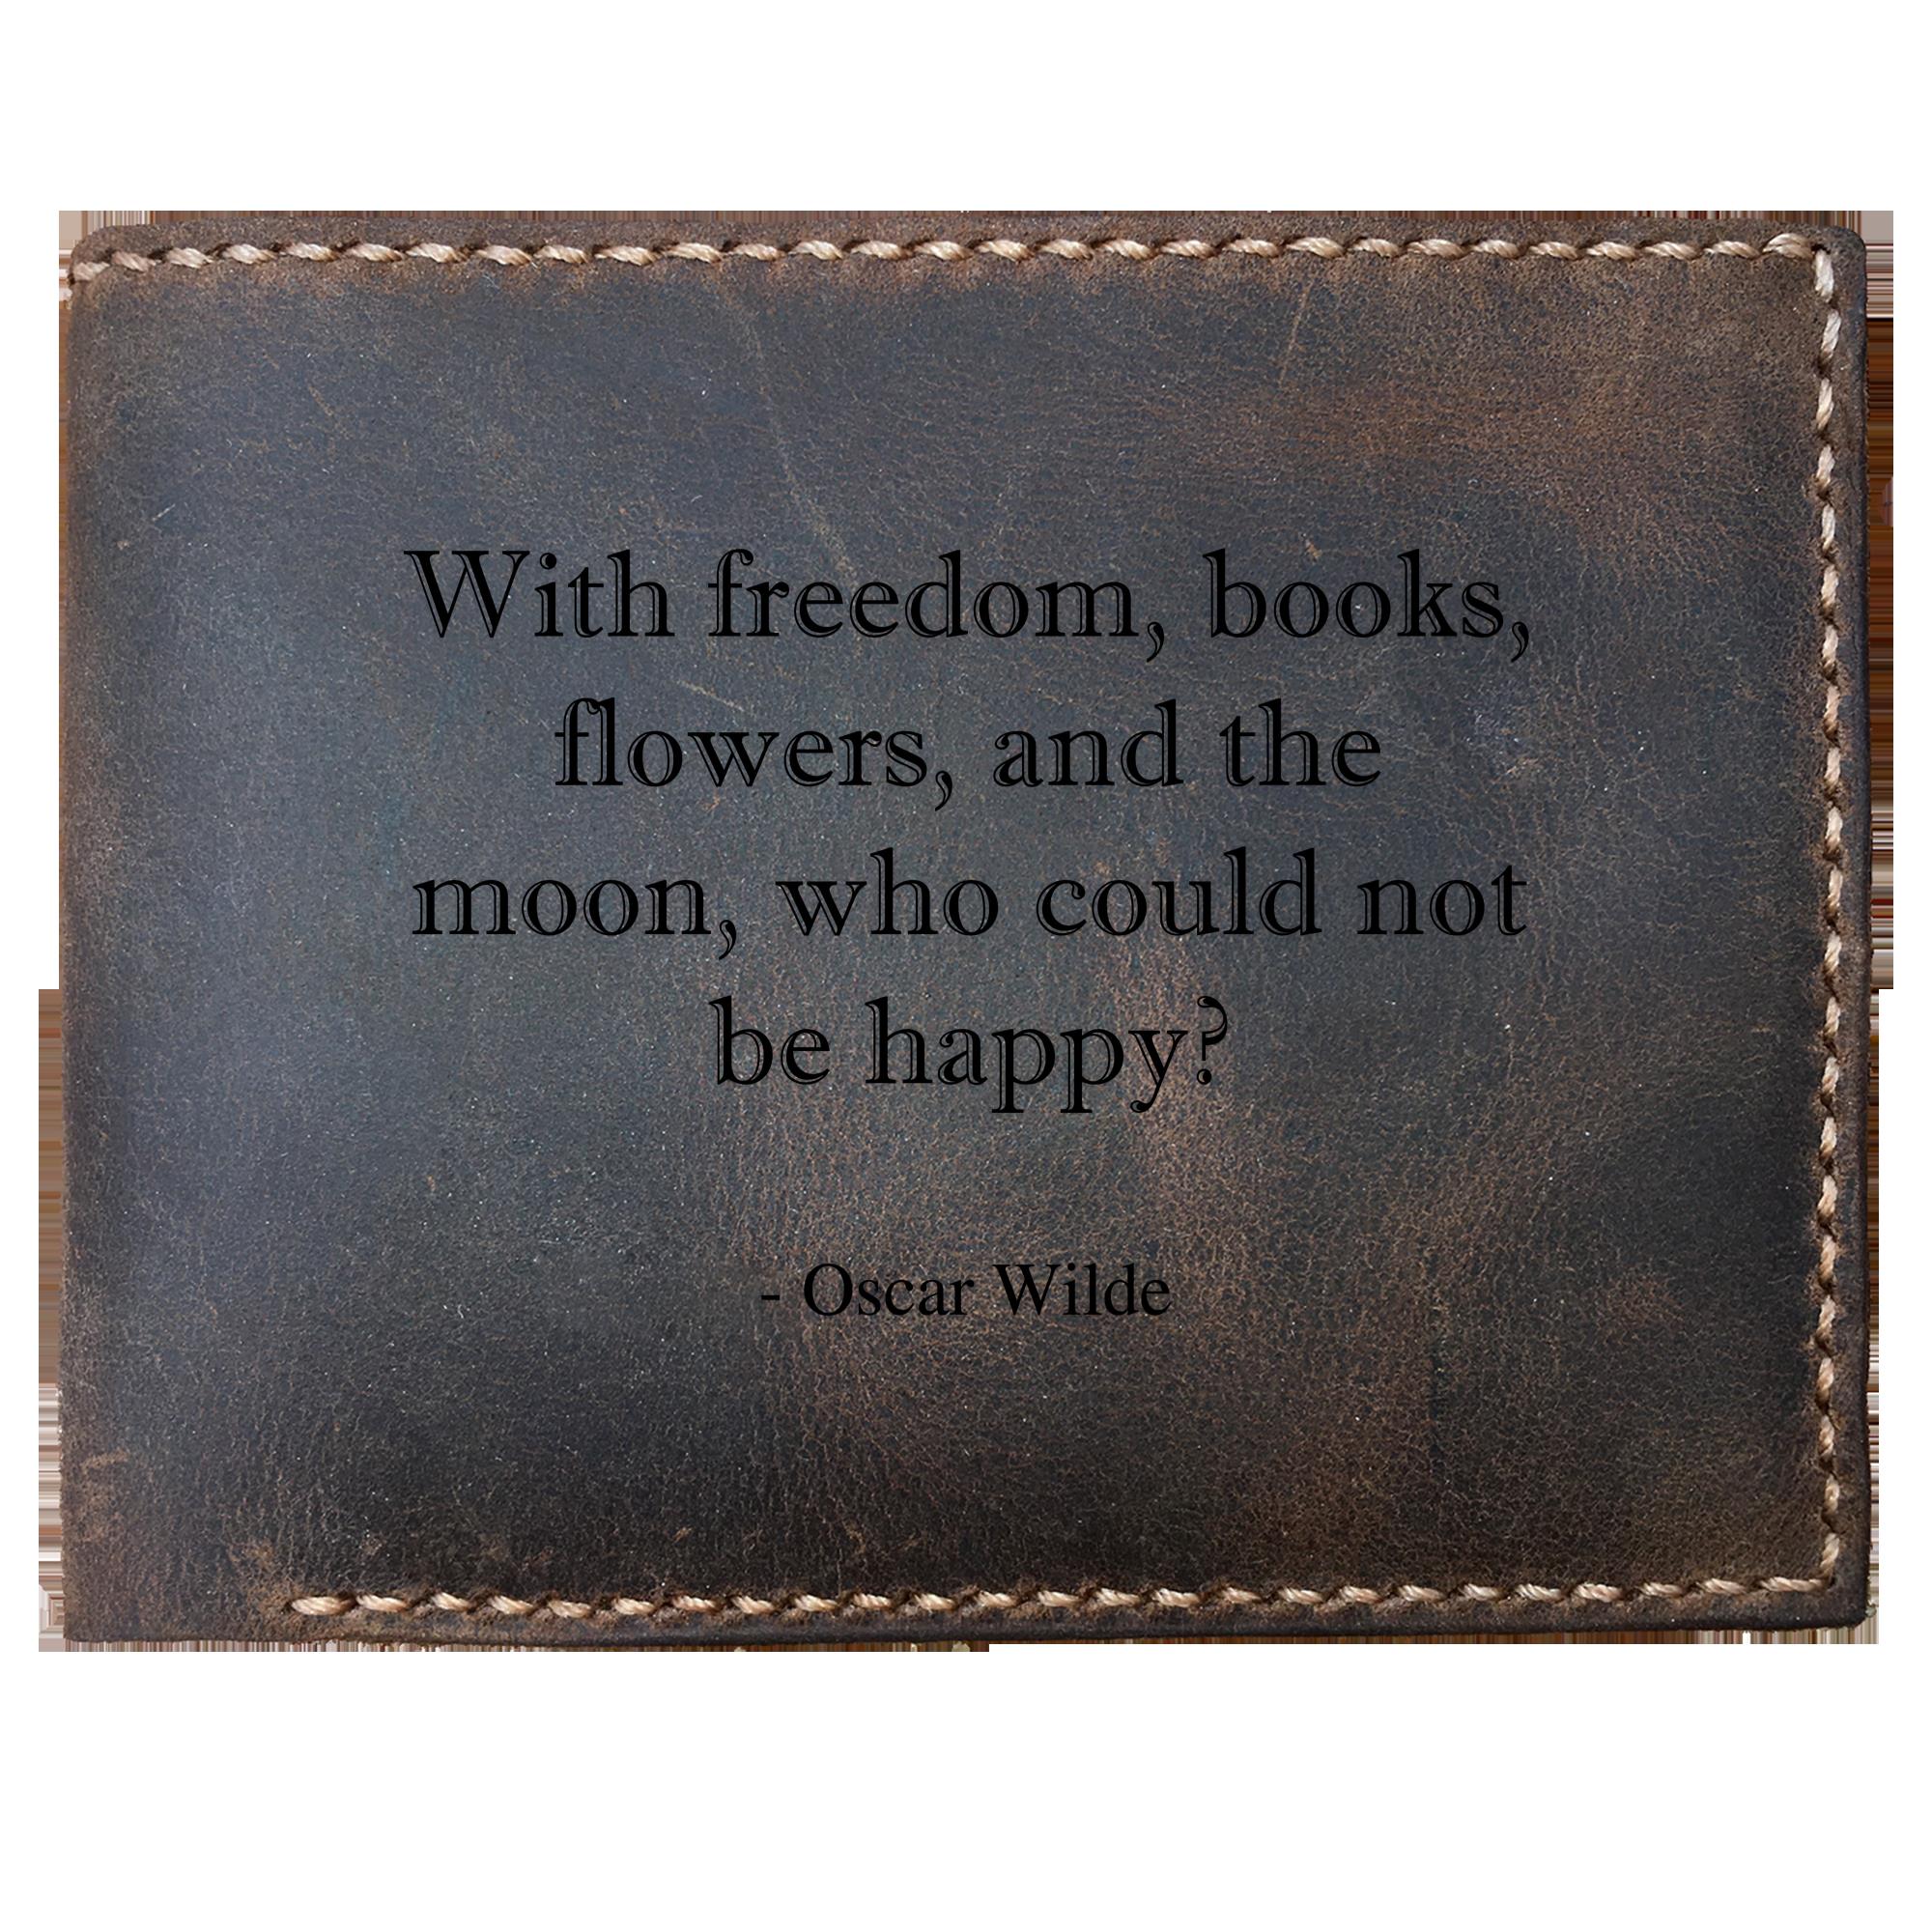 Skitongifts Funny Custom Laser Engraved Bifold Leather Wallet, With Oscar Wilde Motivational Saying Freedom, Books, Flower, The Moon, And Happiness